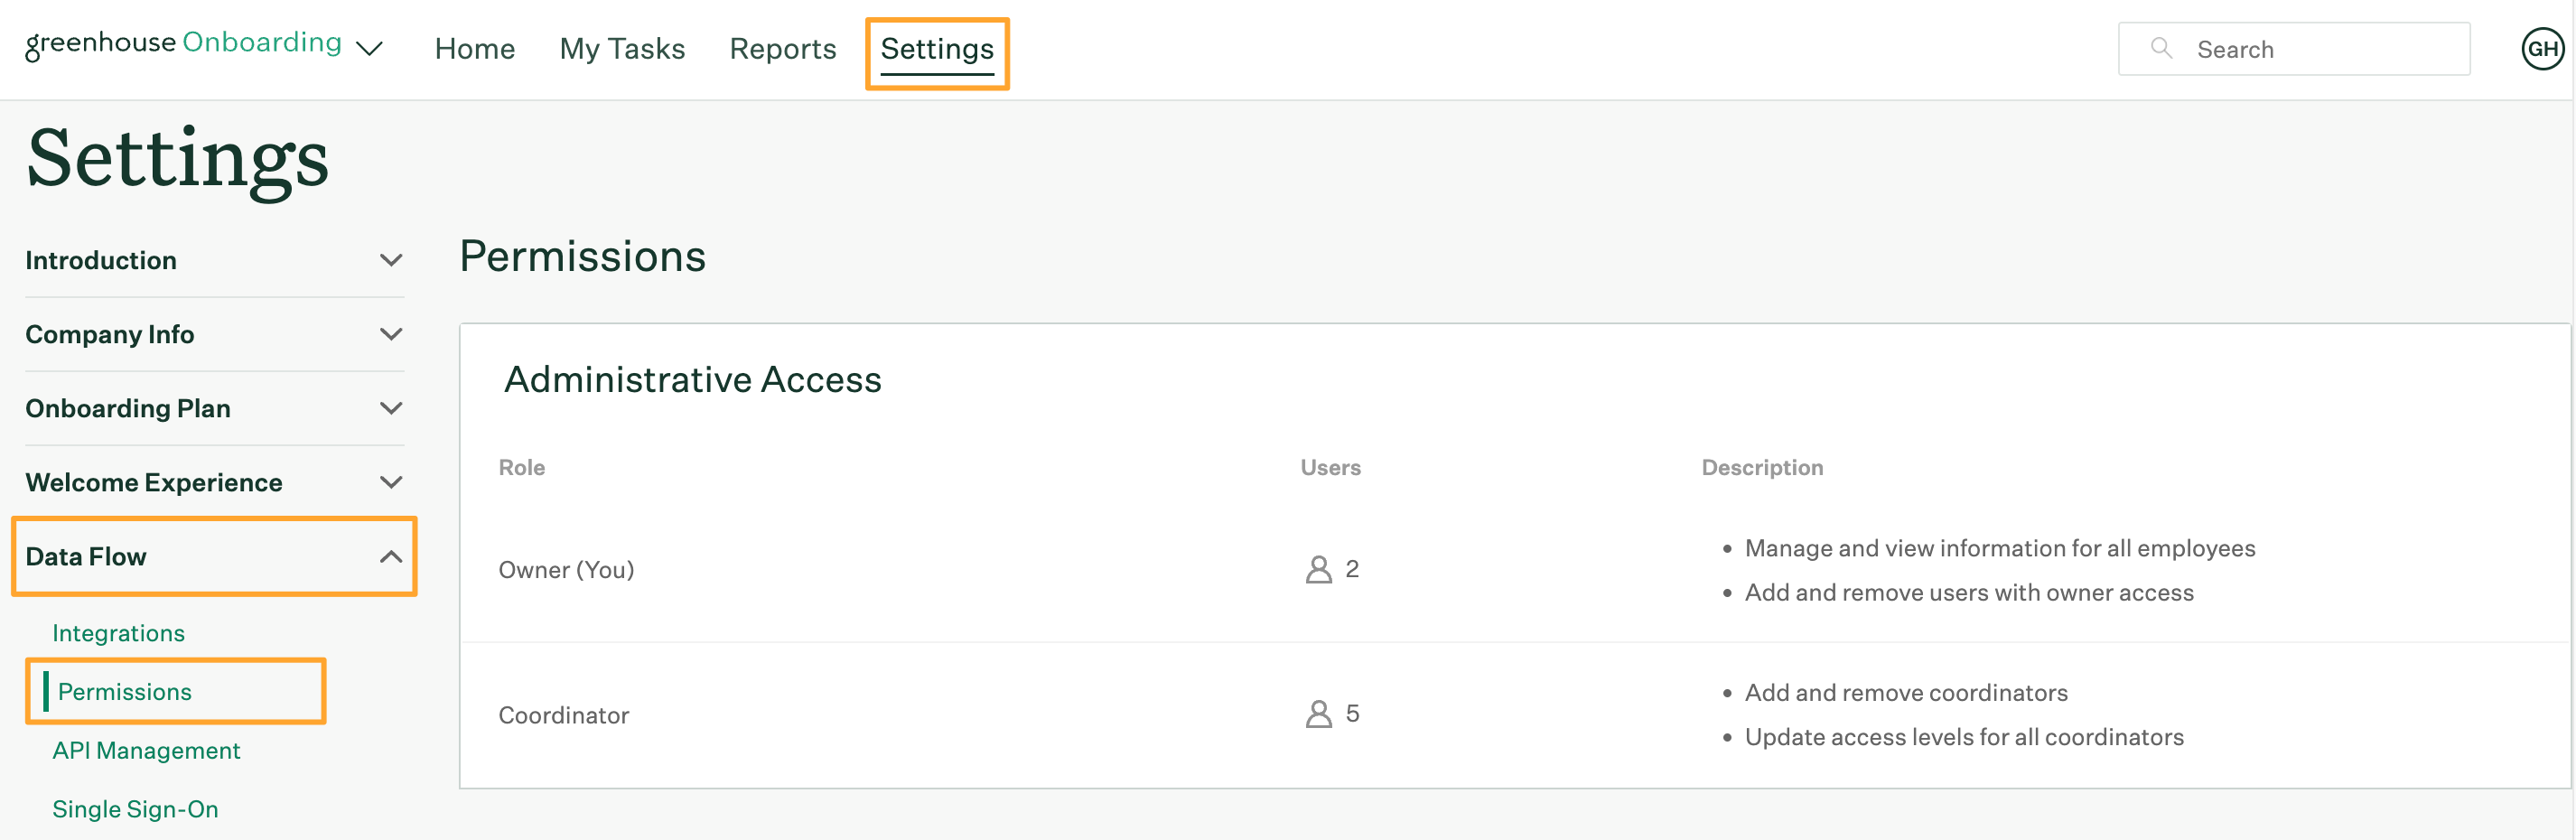 Greenhouse Onboarding Permissions settings page with navigation buttons highlighted